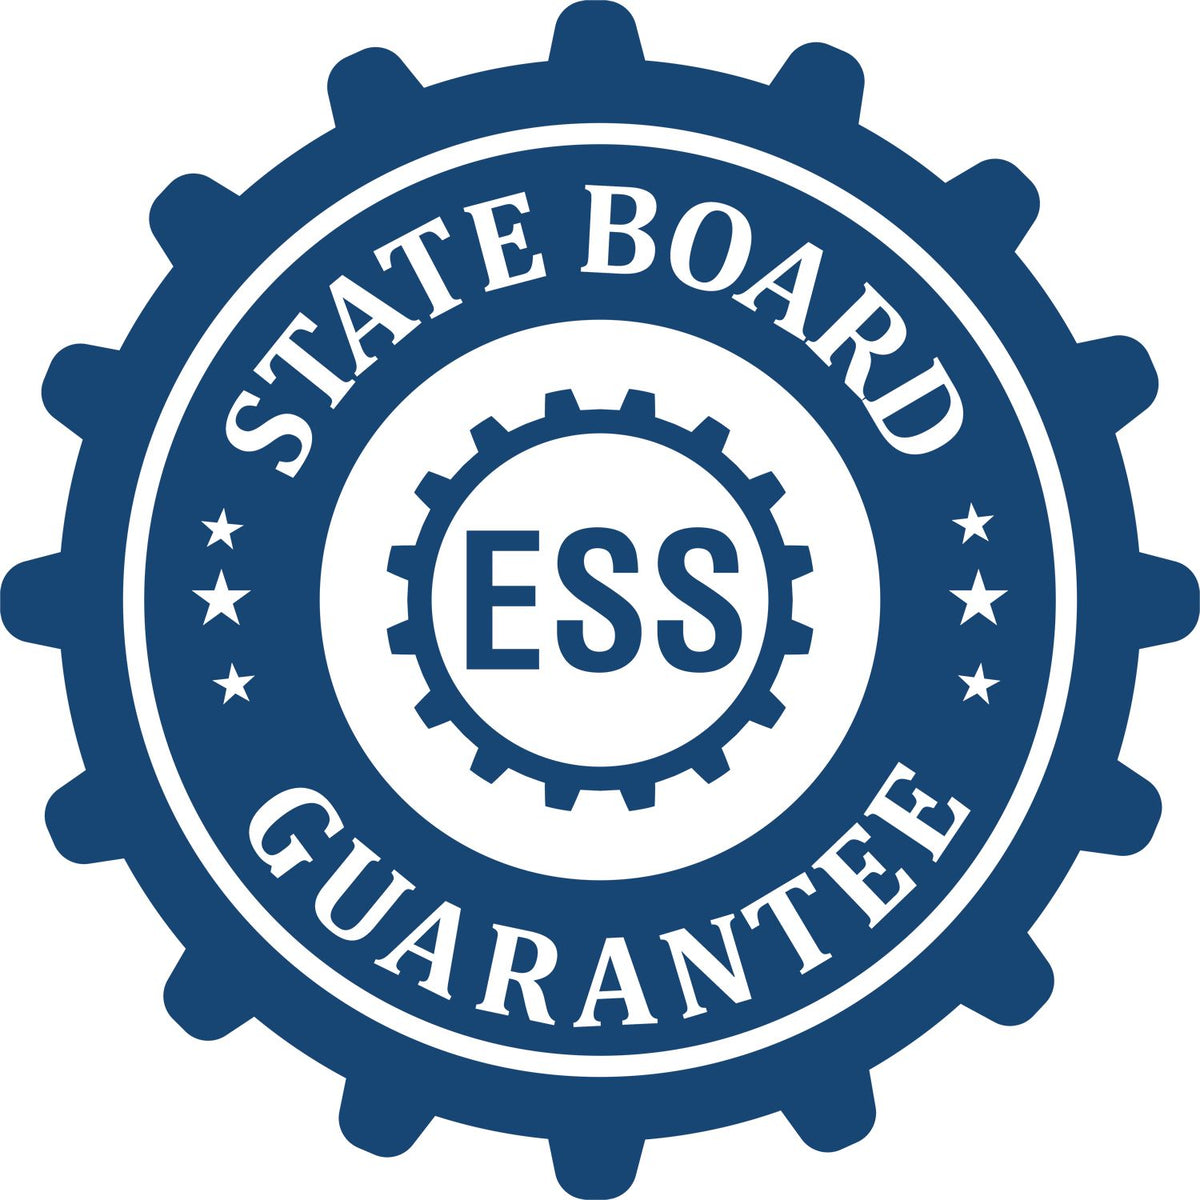 An emblem in a gear shape illustrating a state board guarantee for the Handheld Washington Professional Engineer Embosser product.